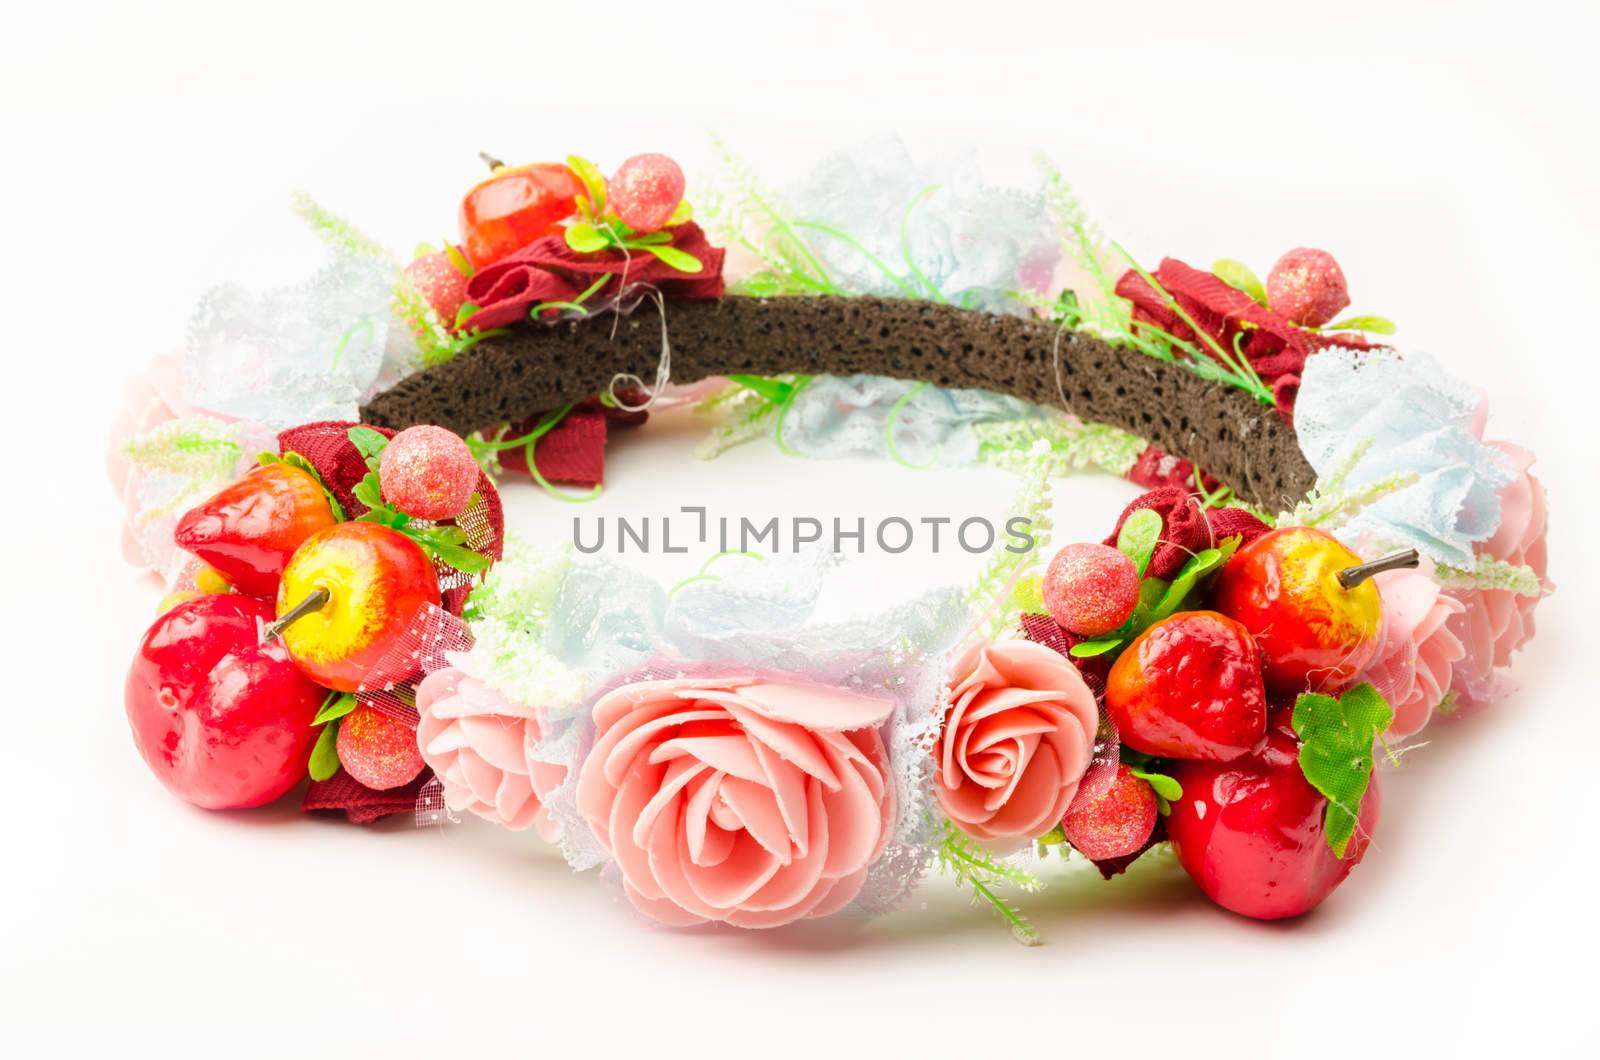 forest coronal or colorful fake flower crown isolated on white background